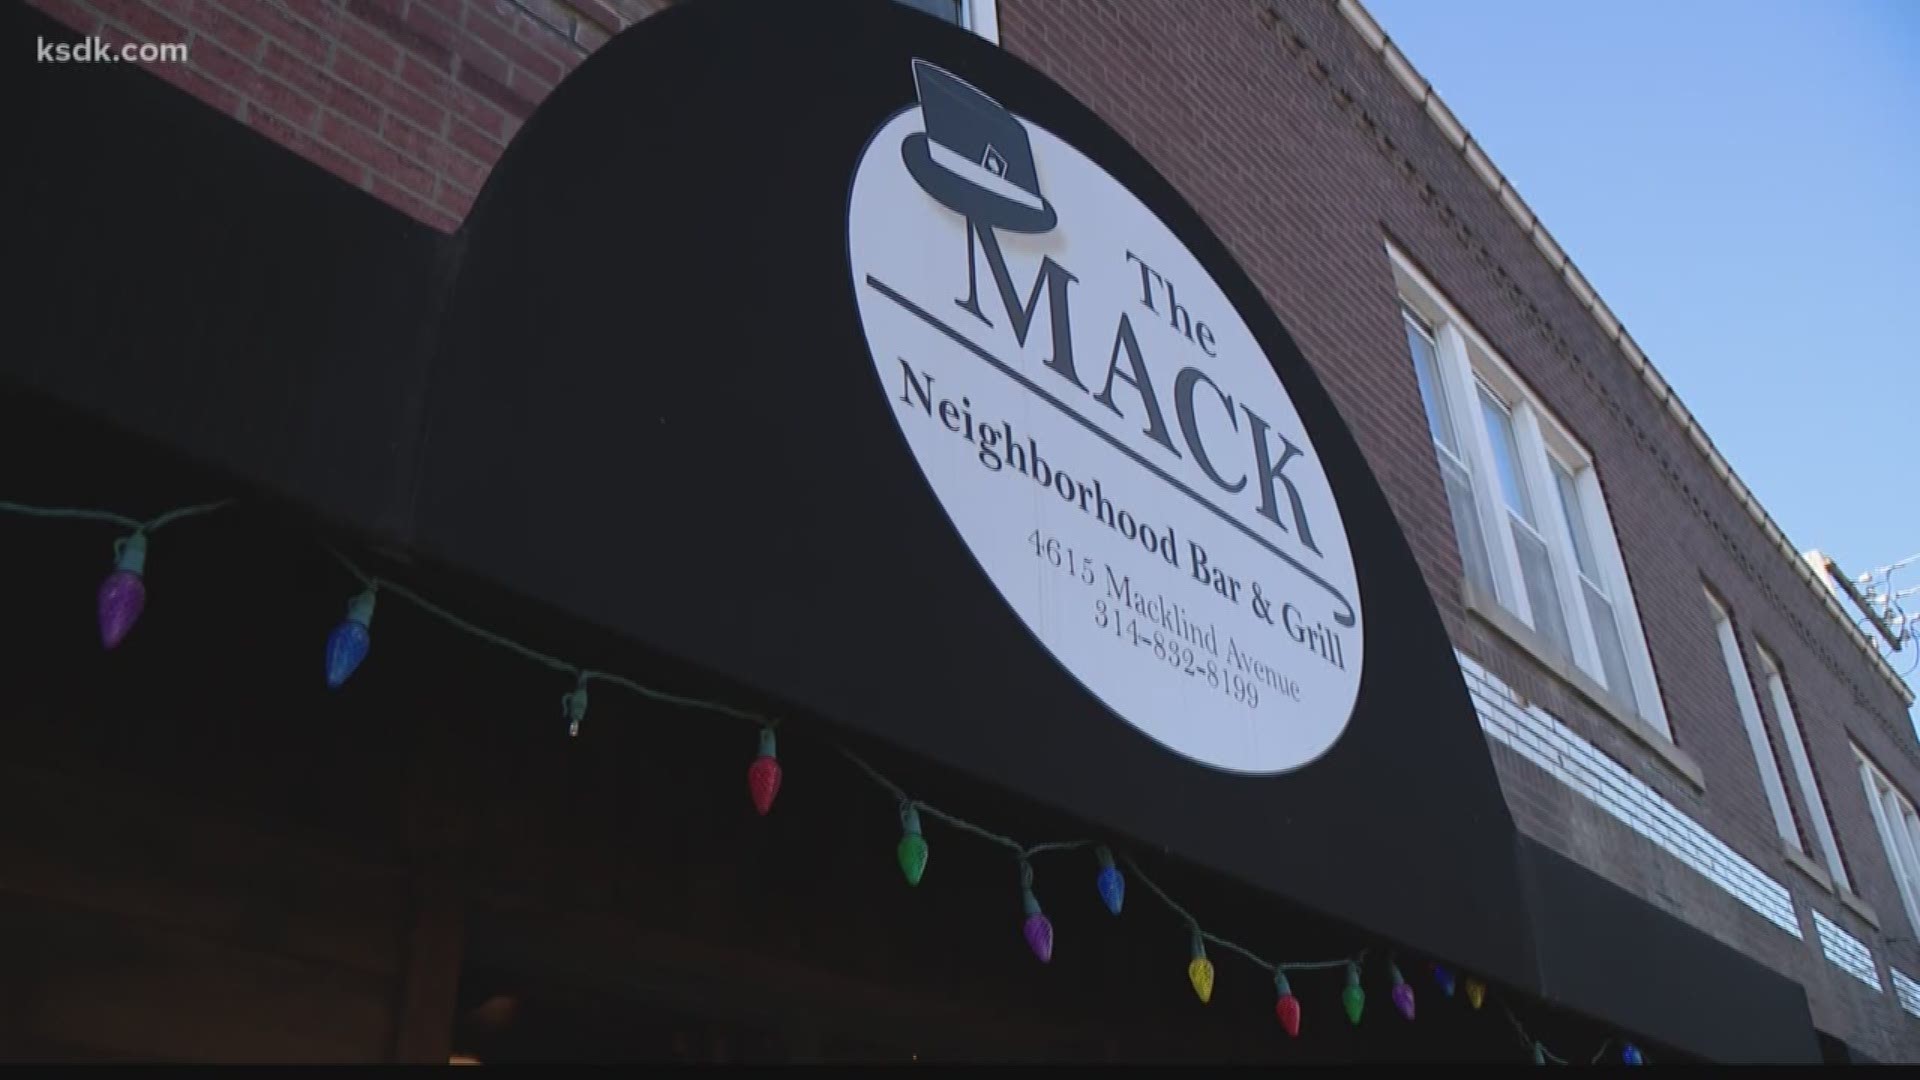 Three armed men robbed customers and employees at The Mack.